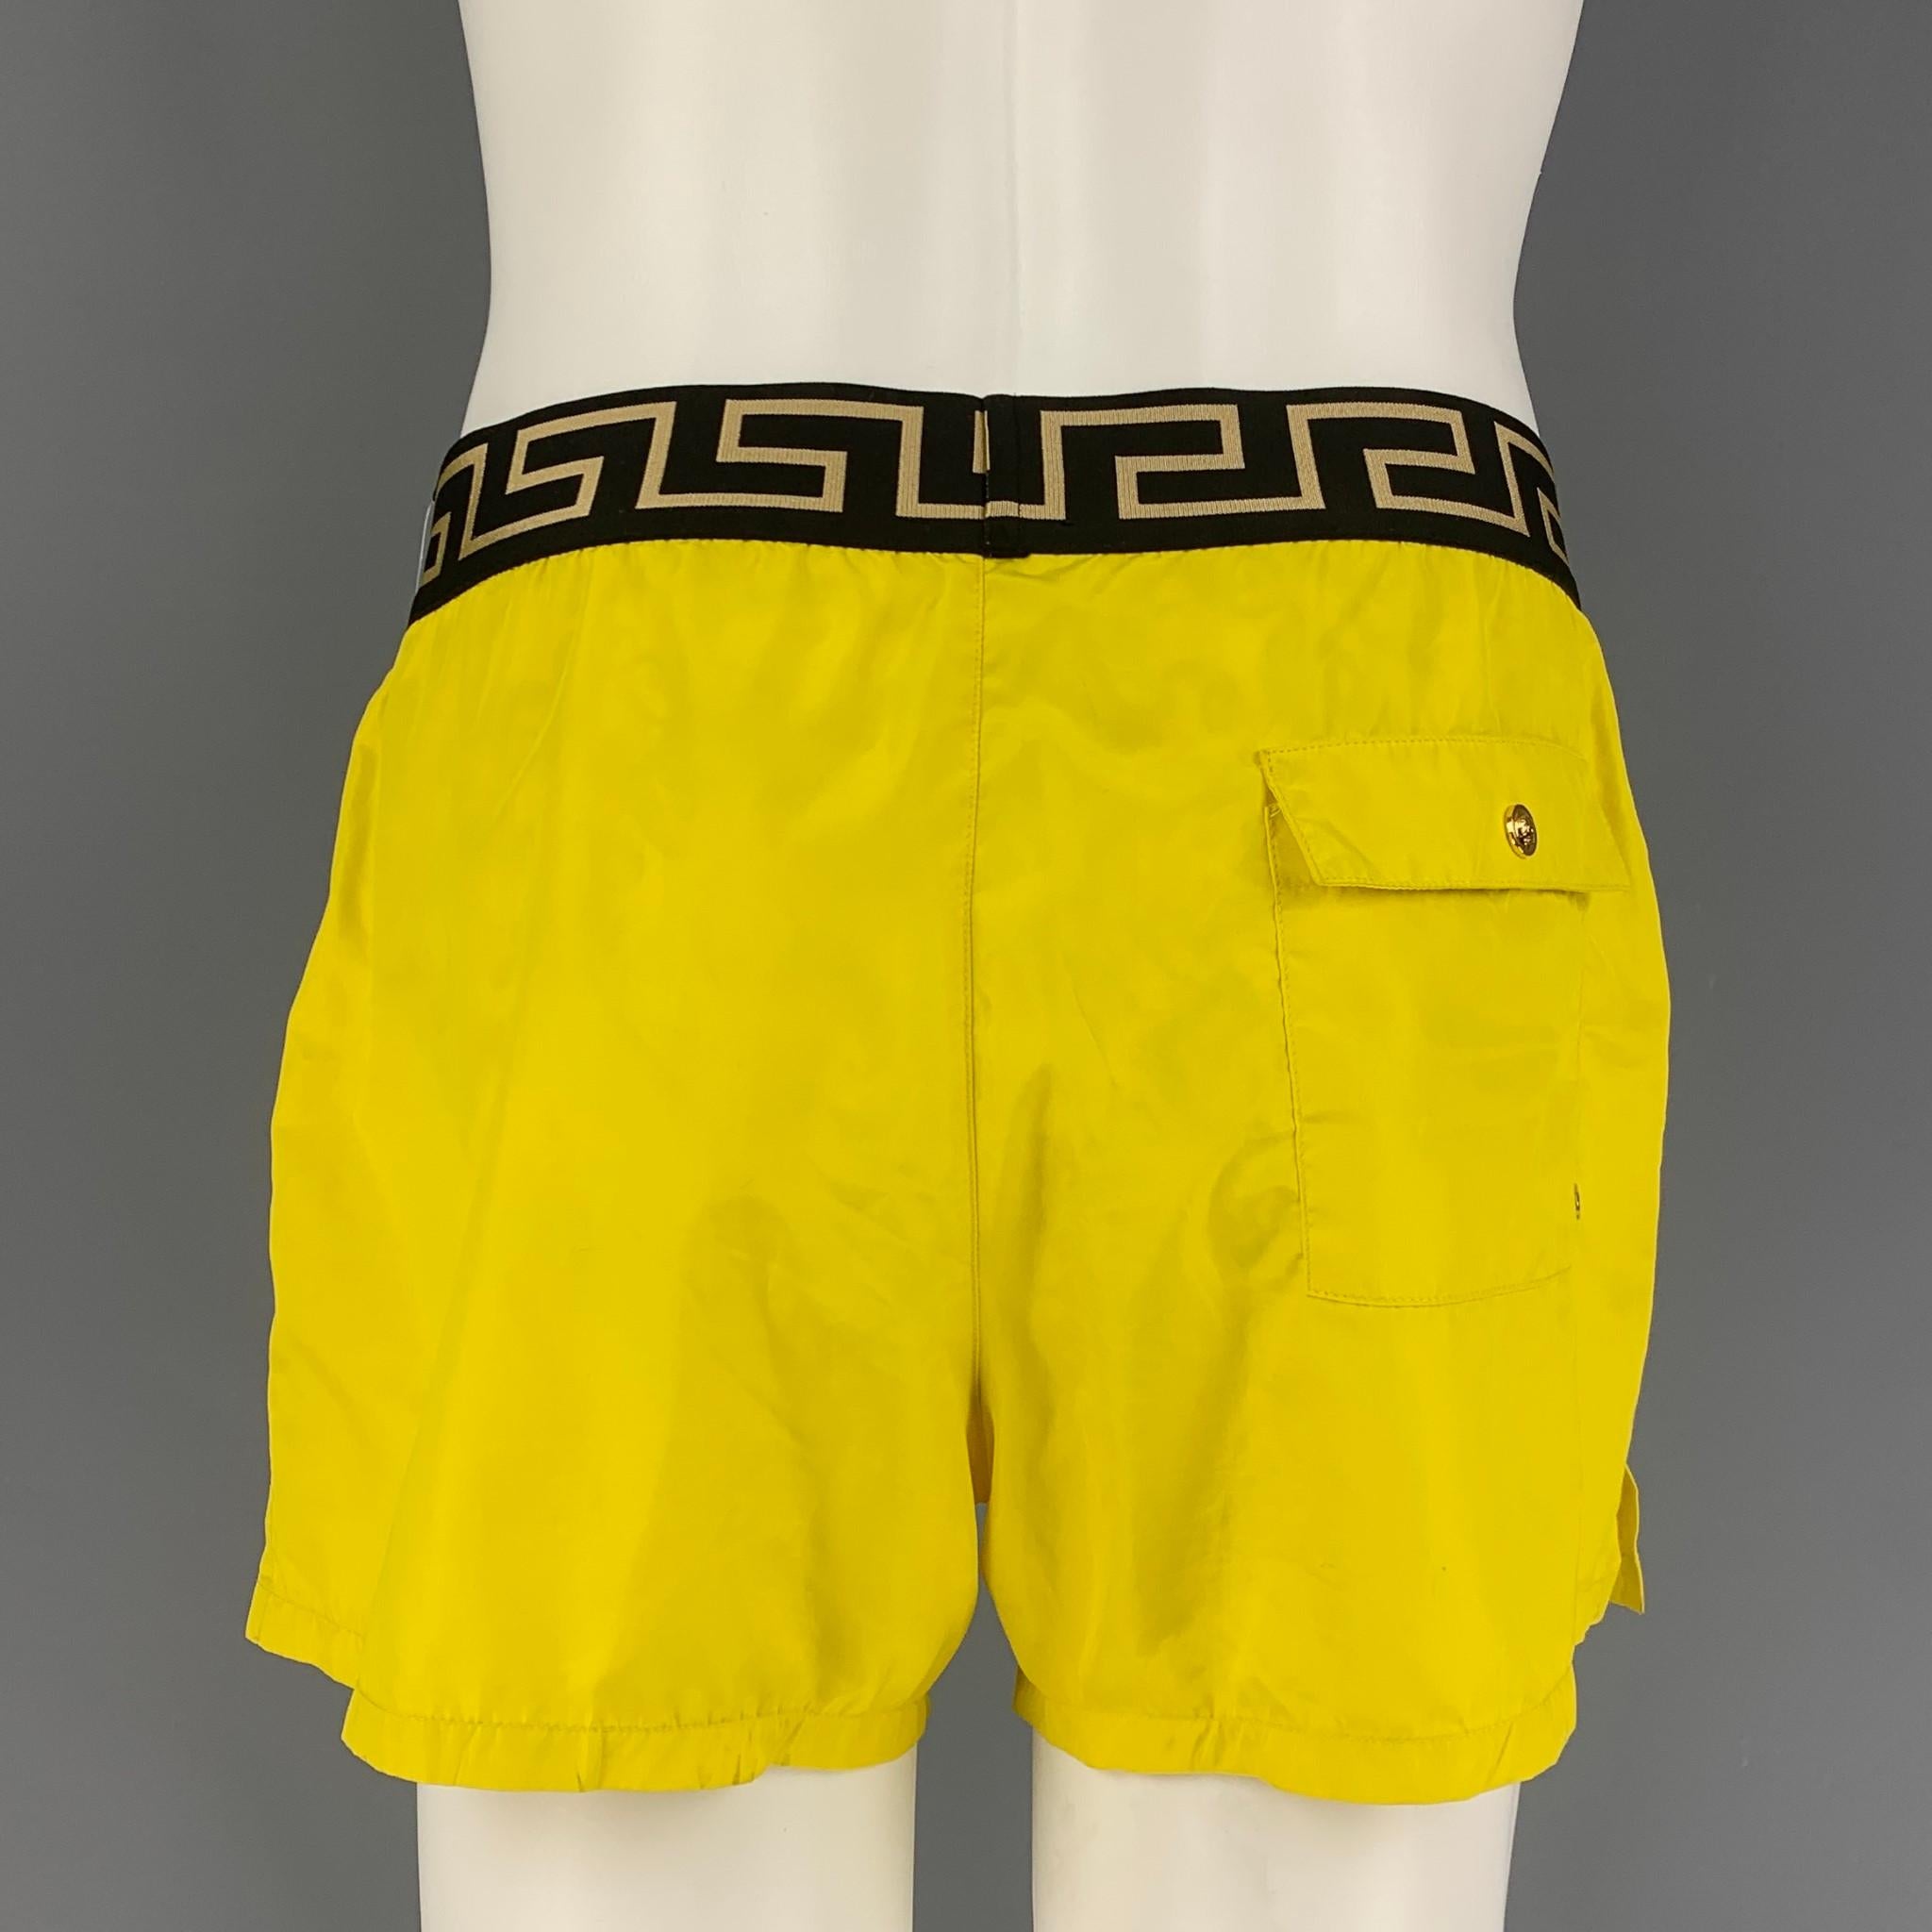 VERSACE swim trunks comes in a yellow & black nylon featuring a mesh liner and a elastic waistband. Made in Italy. 

Very Good Pre-Owned Condition.
Marked: 5

Measurements:

Waist: 30 in.
Rise: 11.5 in.
Inseam: 3.5 in. 